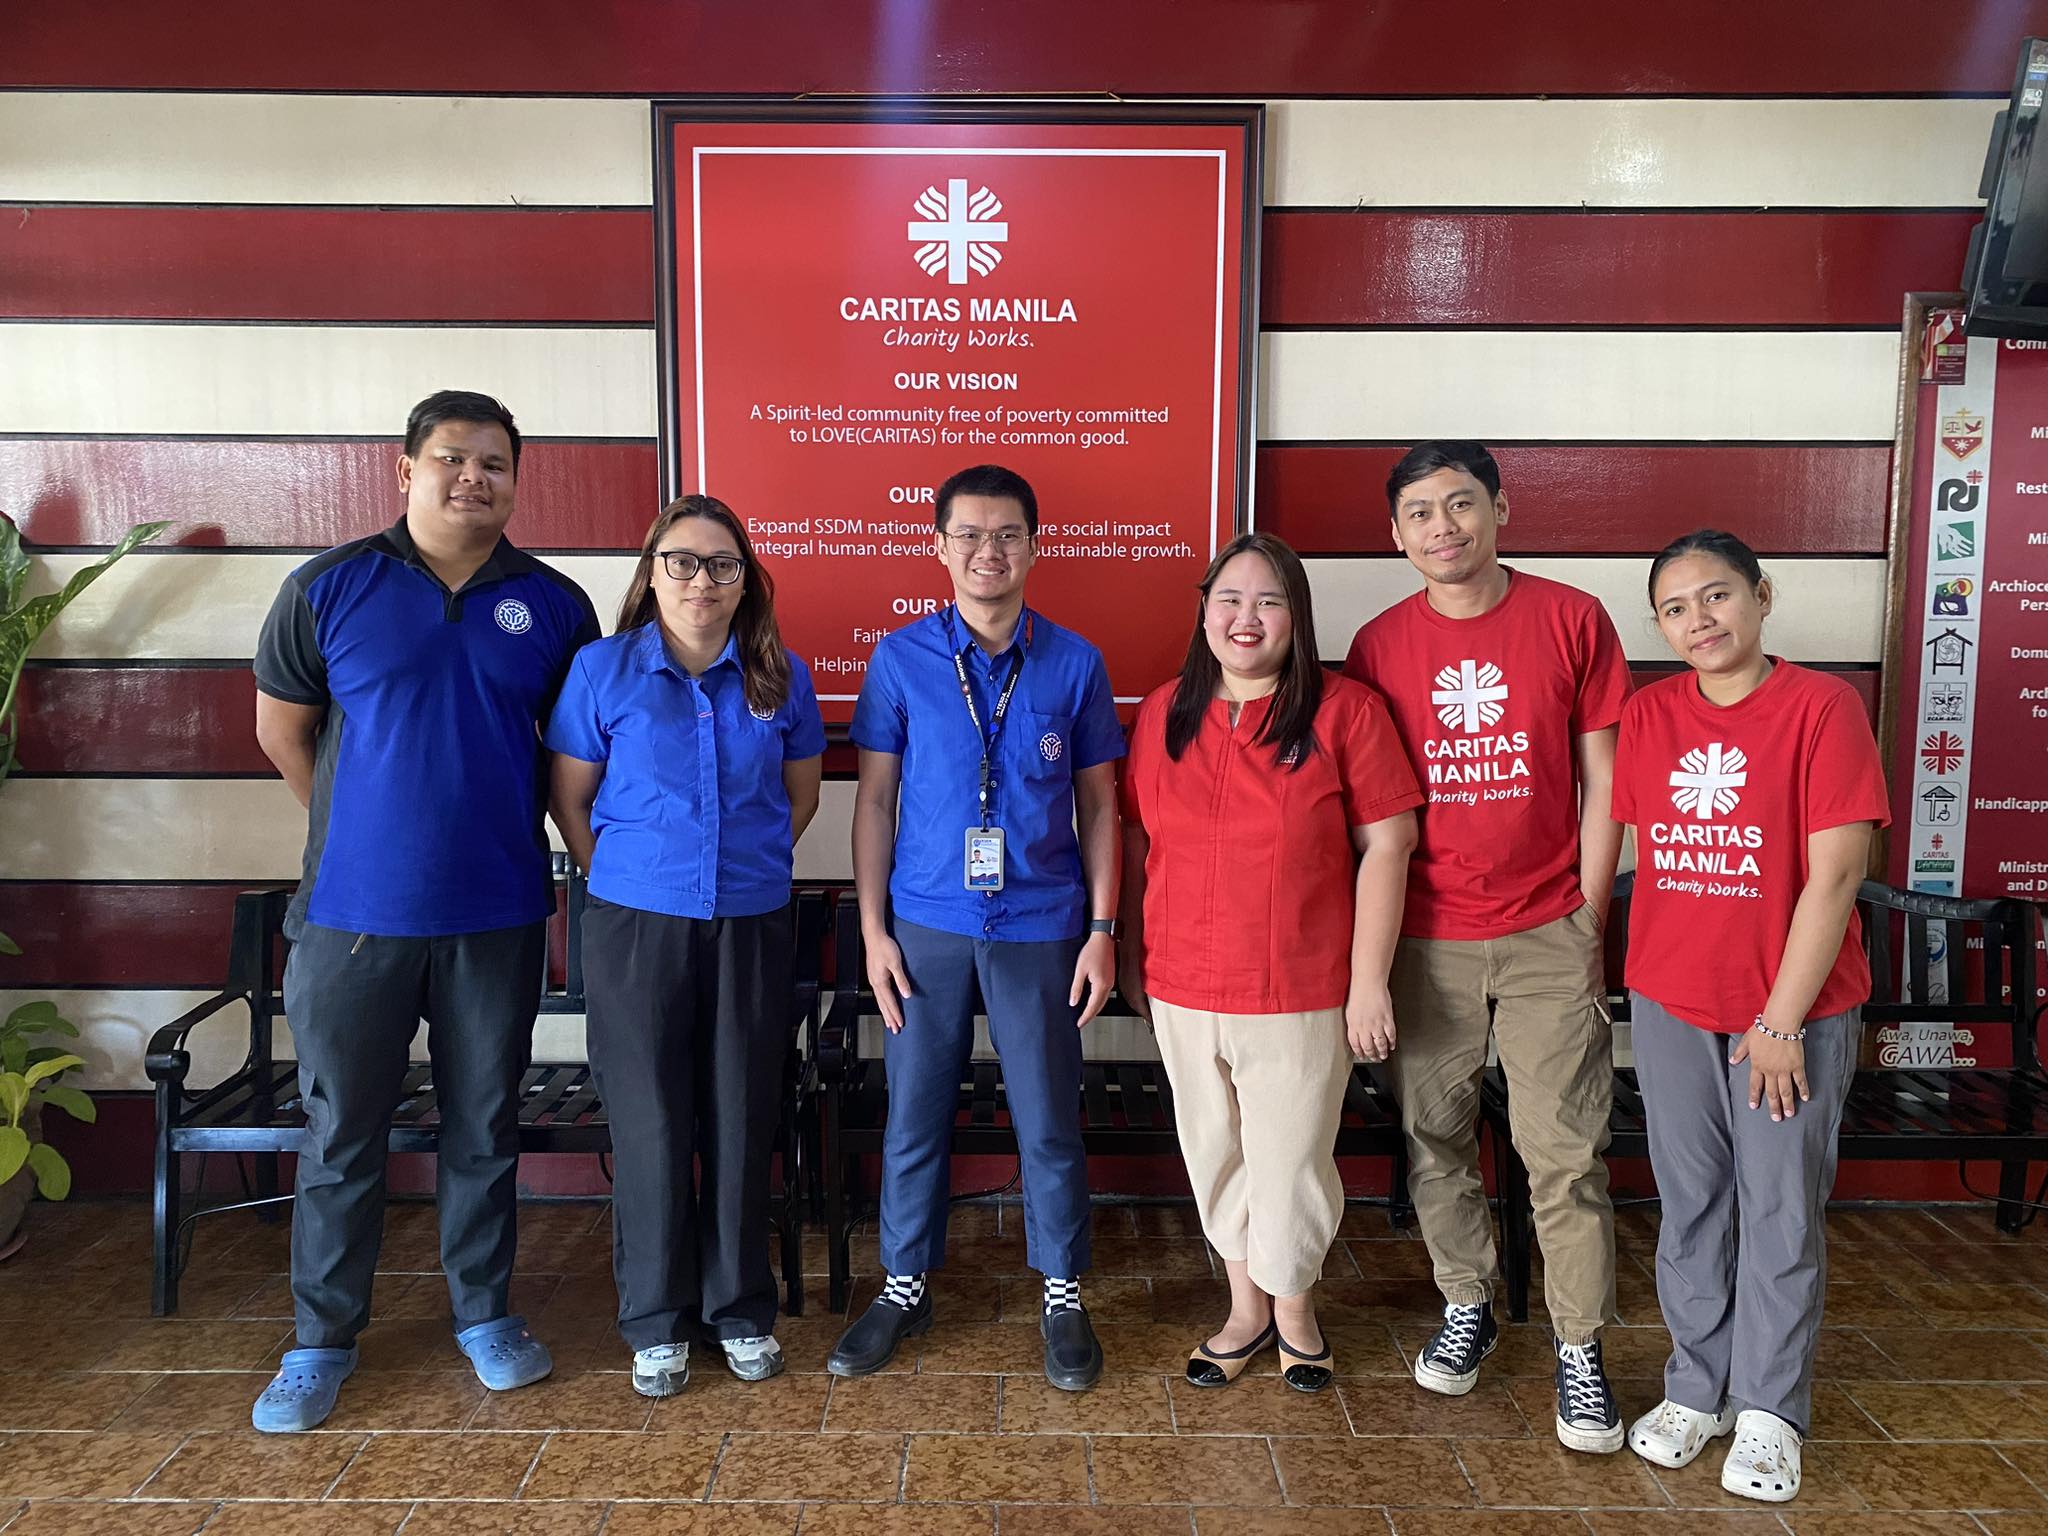 EXPLORATORY MEETING AND OFFICE VISIT WITH CARITAS MANILA